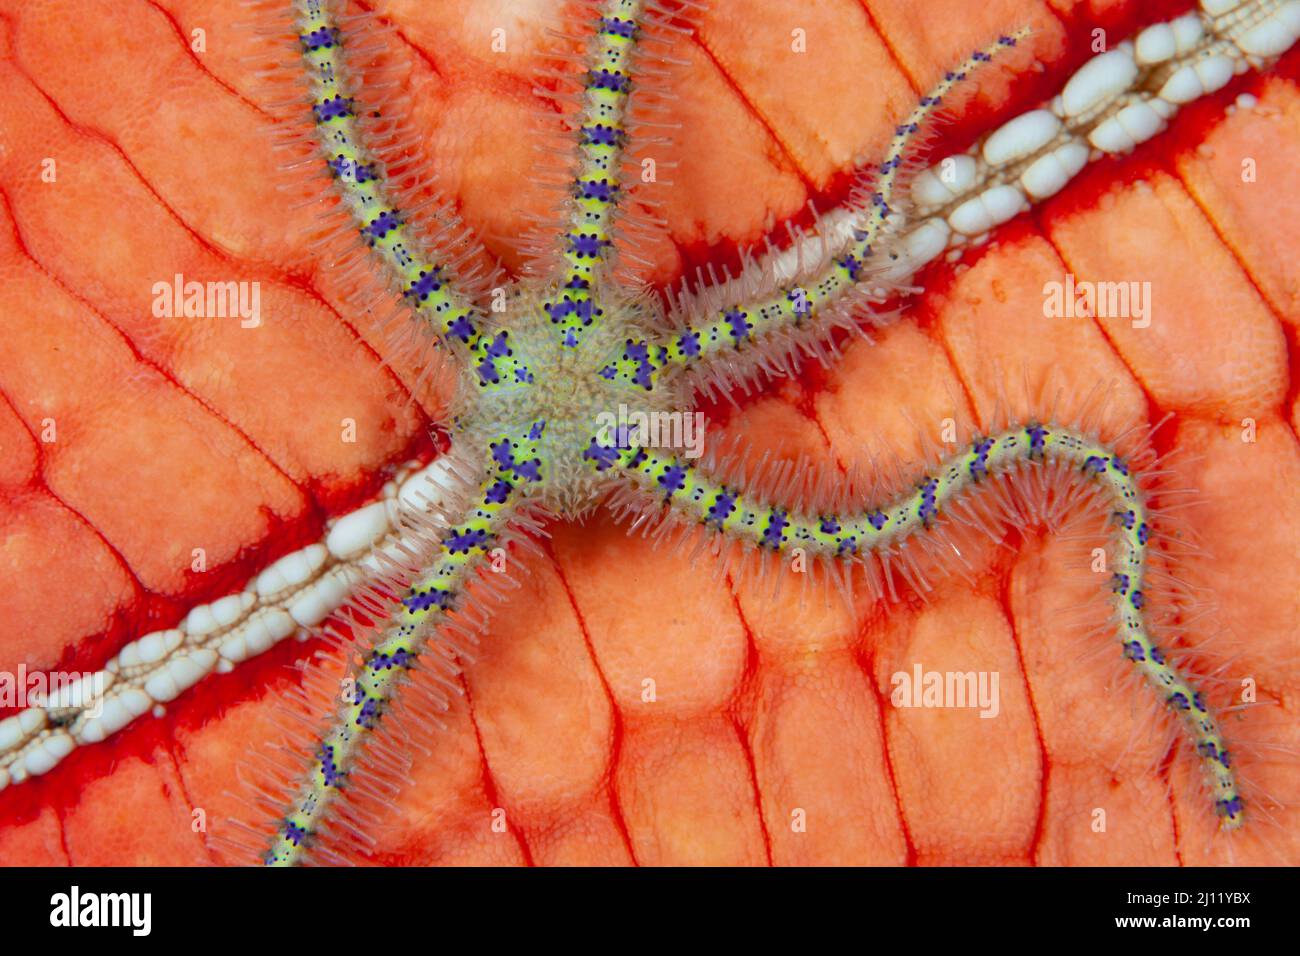 A small, spiny brittle star clings to a colorful Pin cushion sea star, Culcita novaeguineae, on a coral reef in Lembeh Strait, Indonesia. Stock Photo